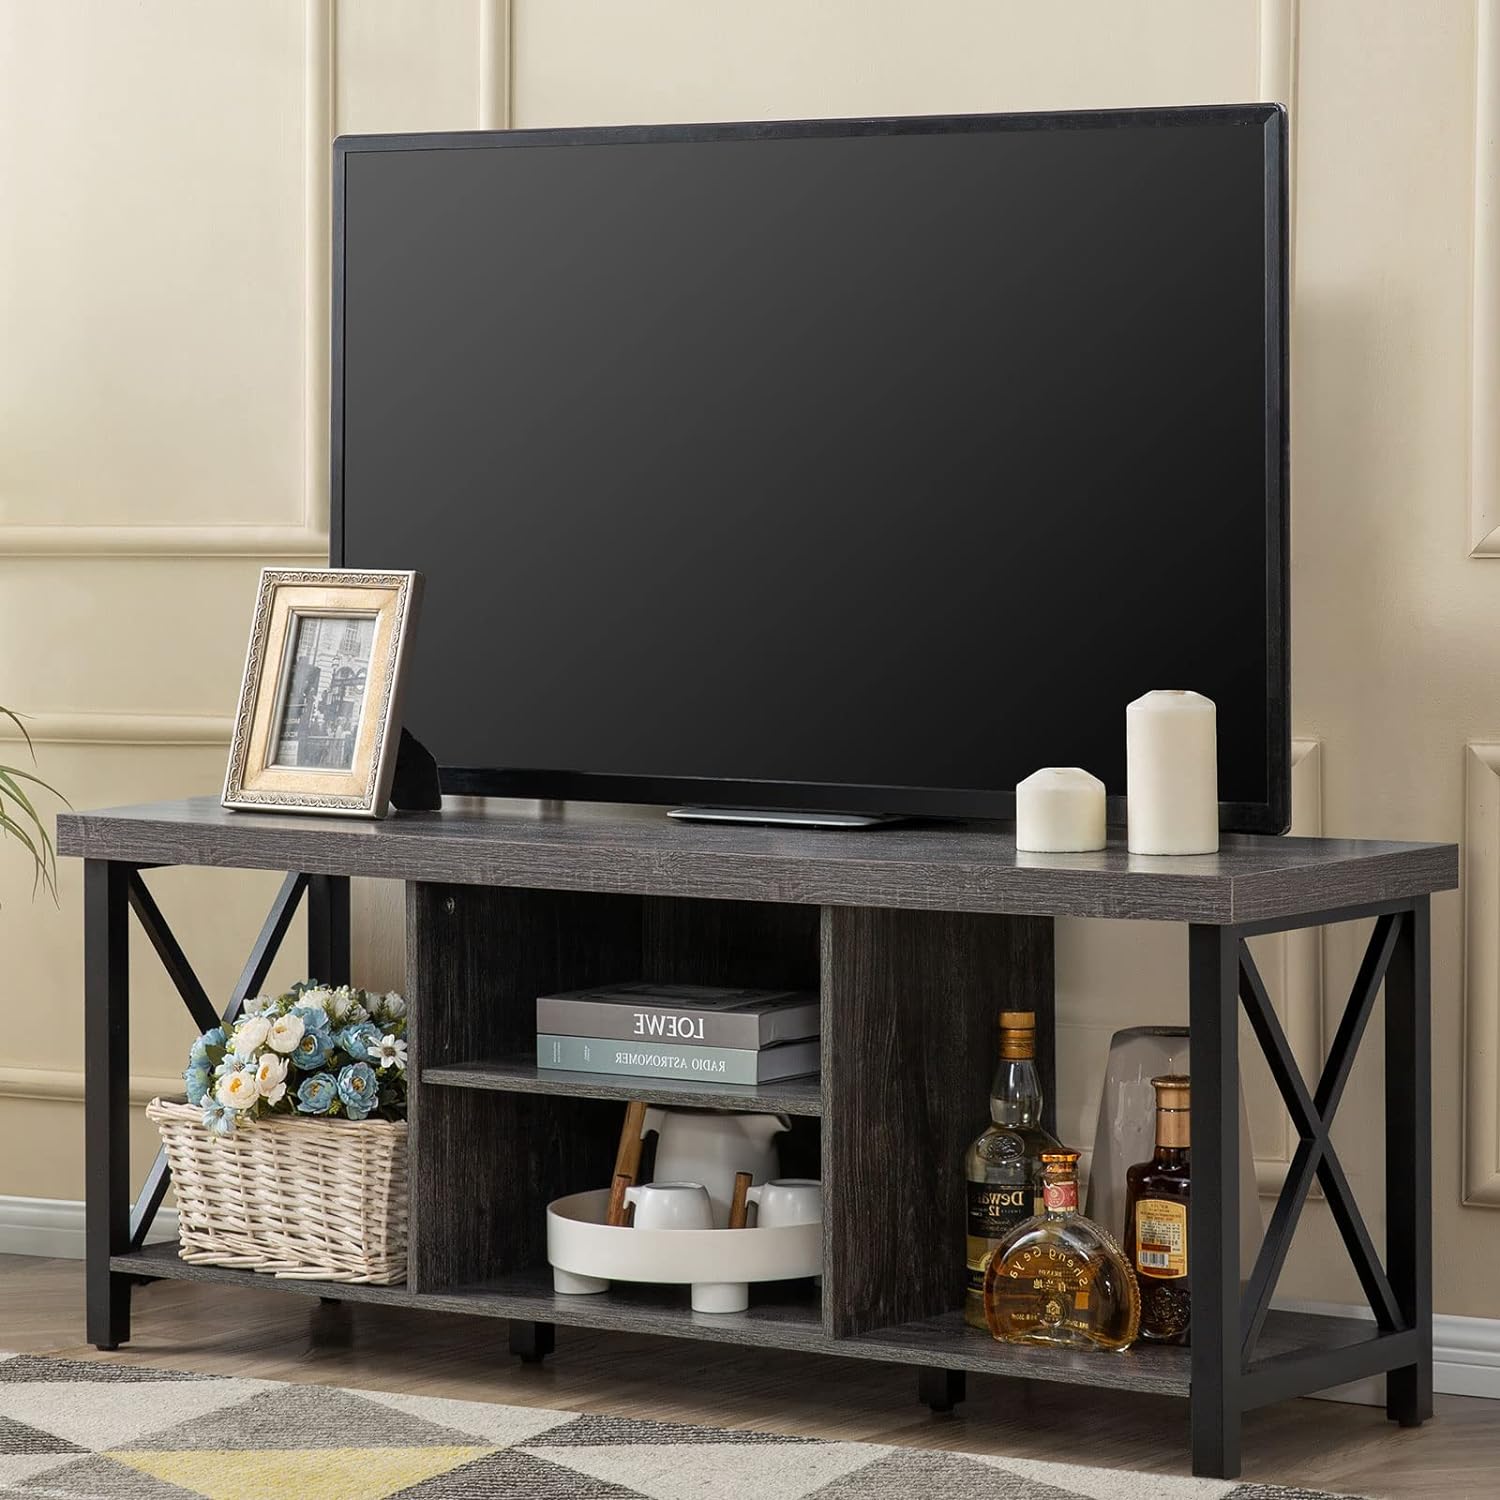 GAZHOME TV Stand for TV up to 55 Inches, TV Cabinet with Open Storage, TV Console Unit with Shelving for Living Room, Entertainment Room, Grey